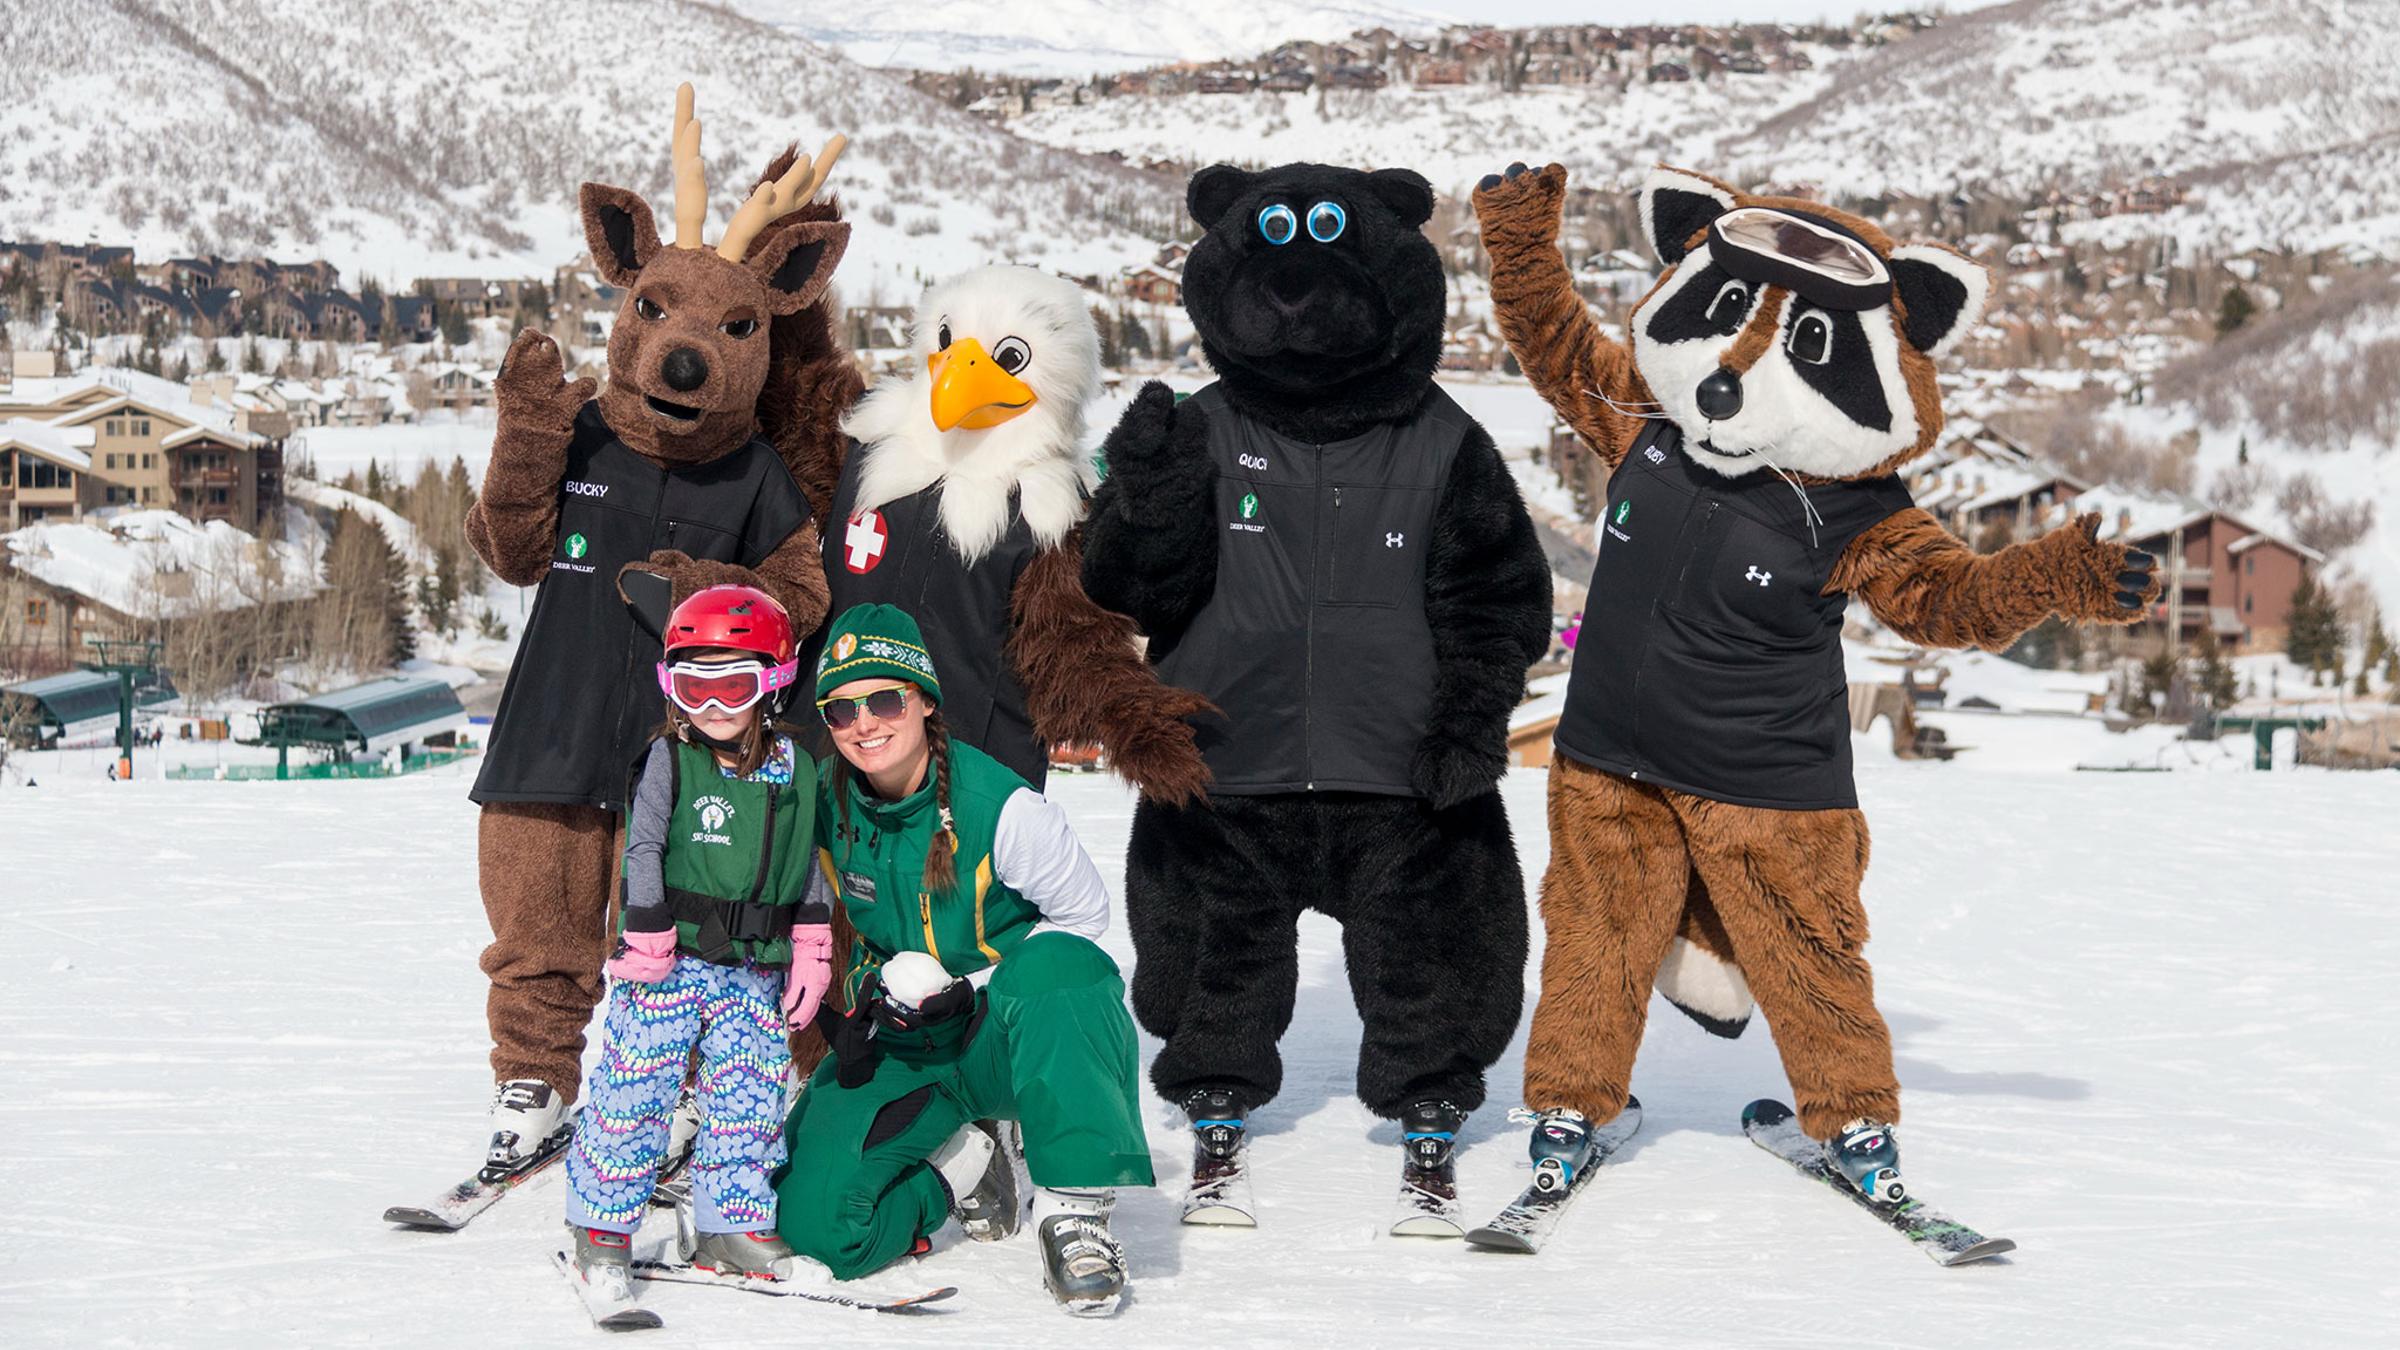 Deer Valley Mascots with an instructor and child guest